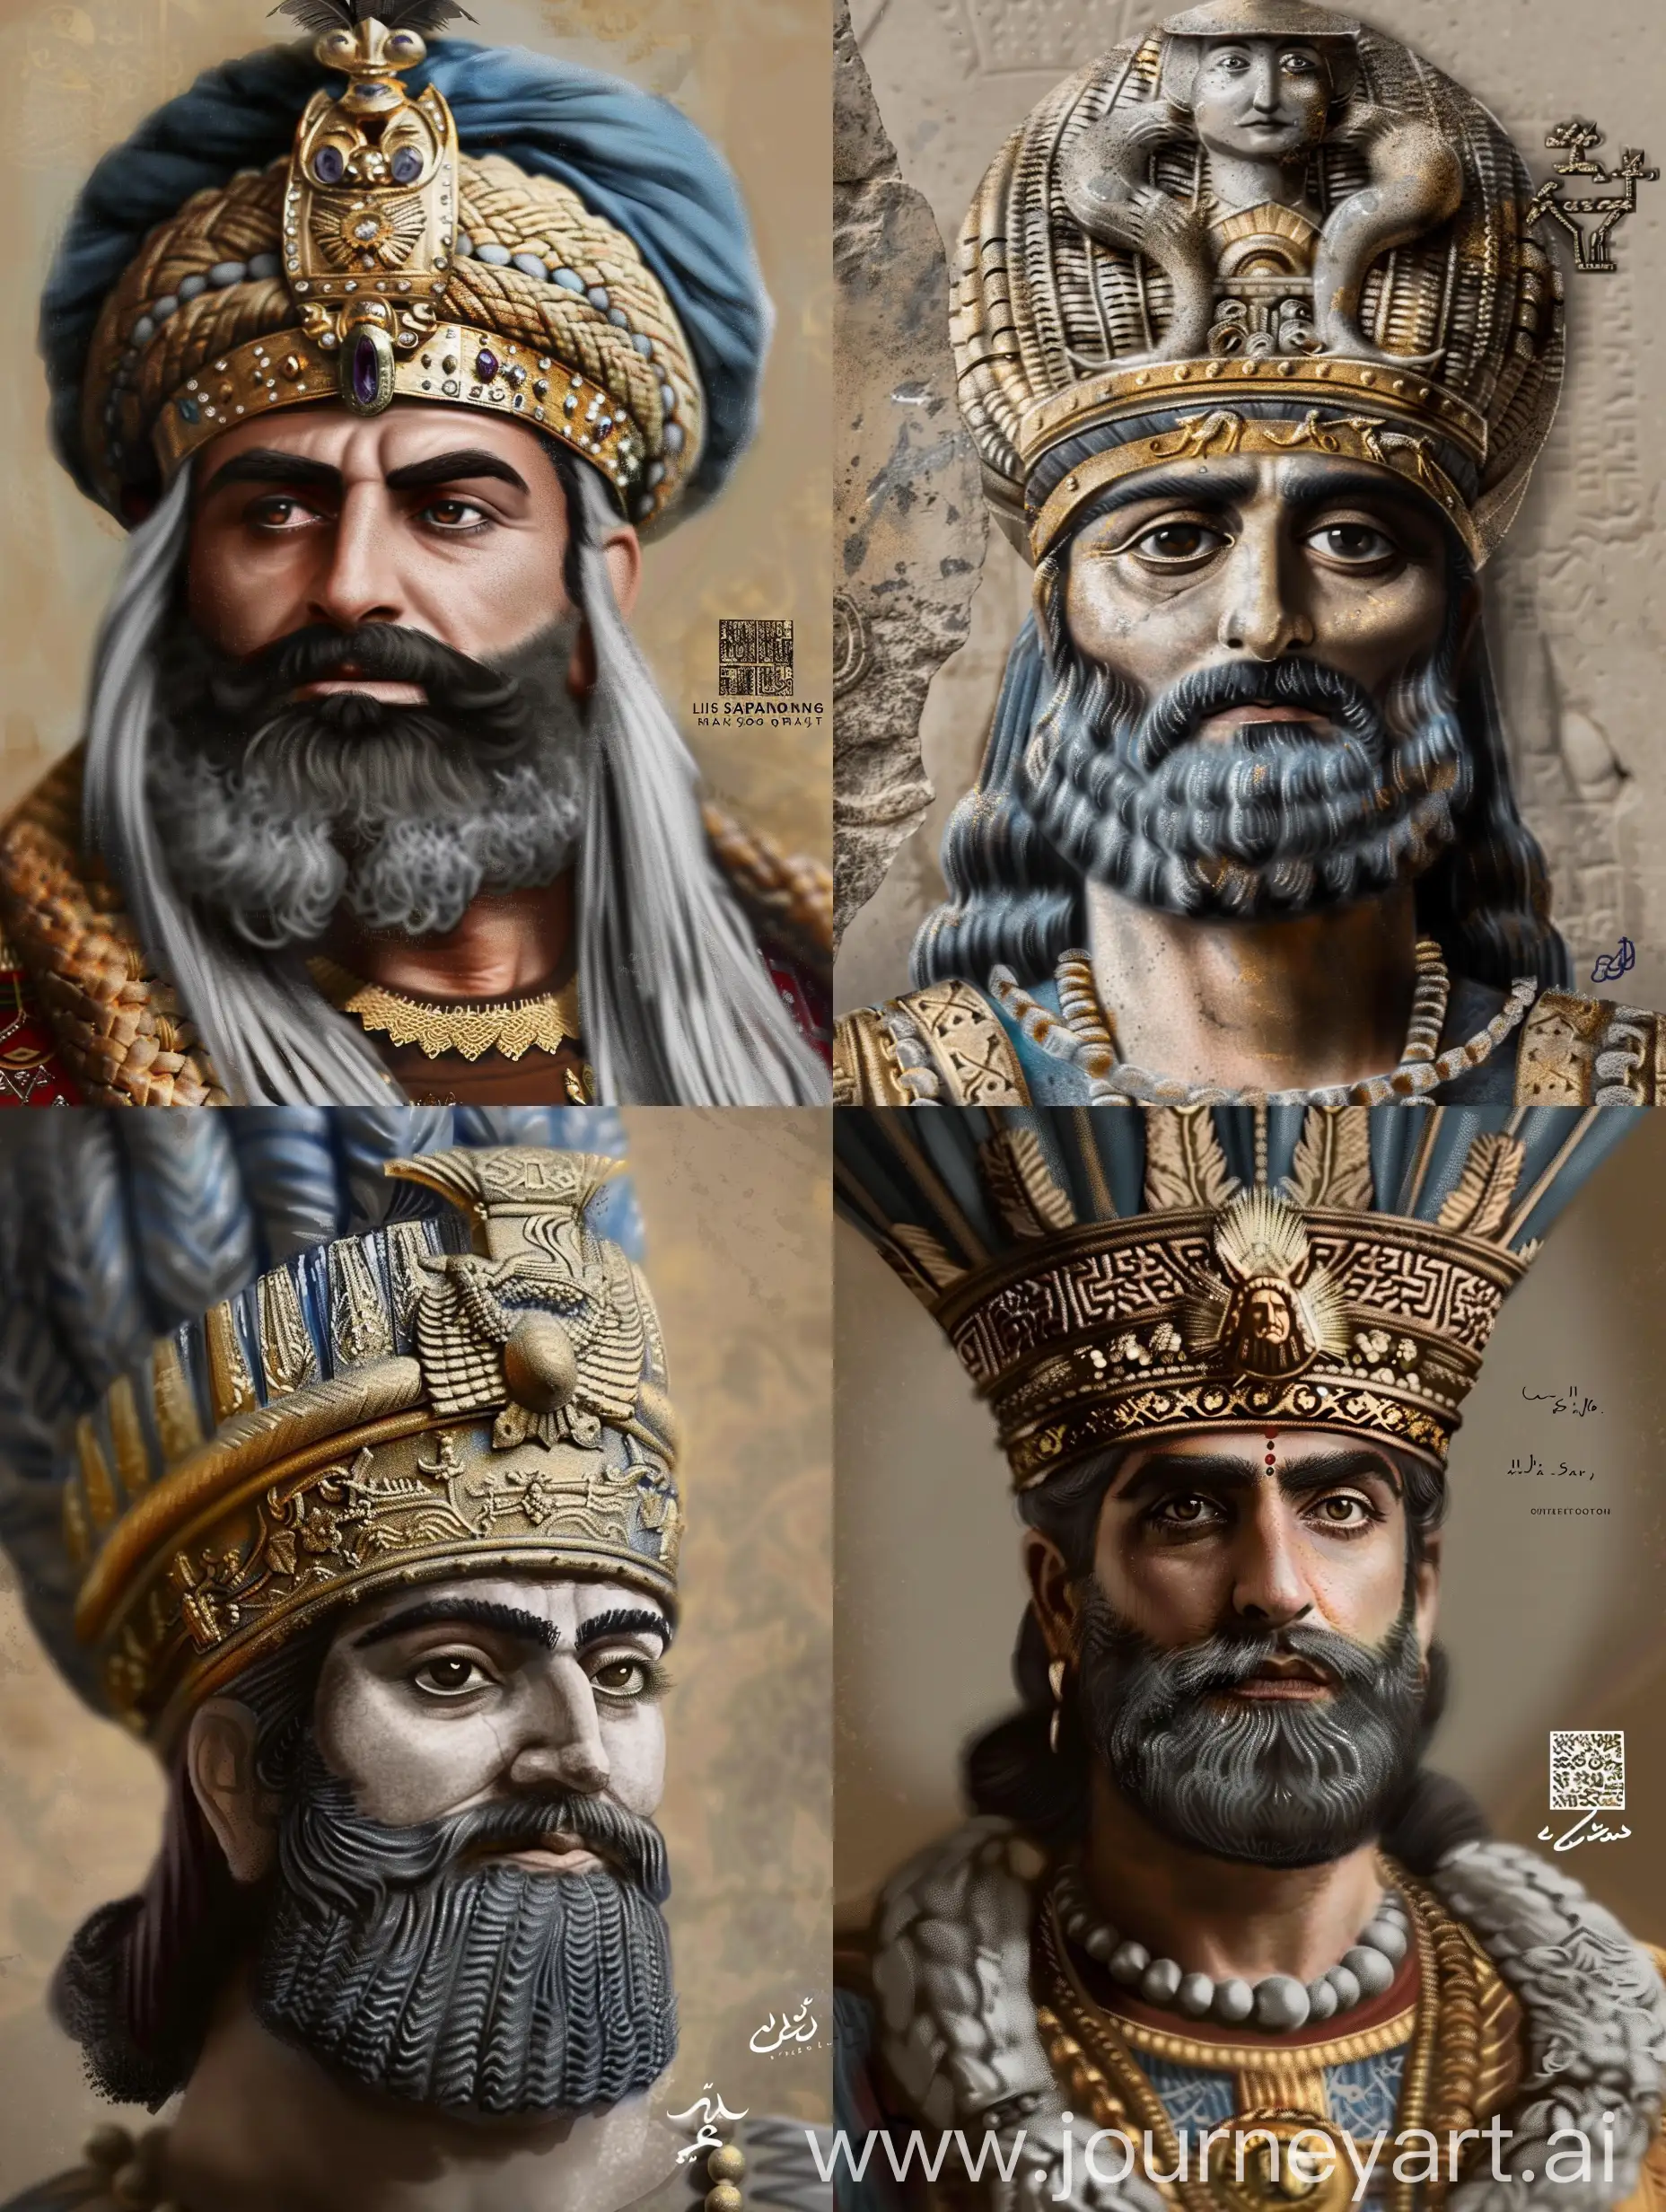 Royal-Sassanid-King-Portrait-with-Intricate-Details